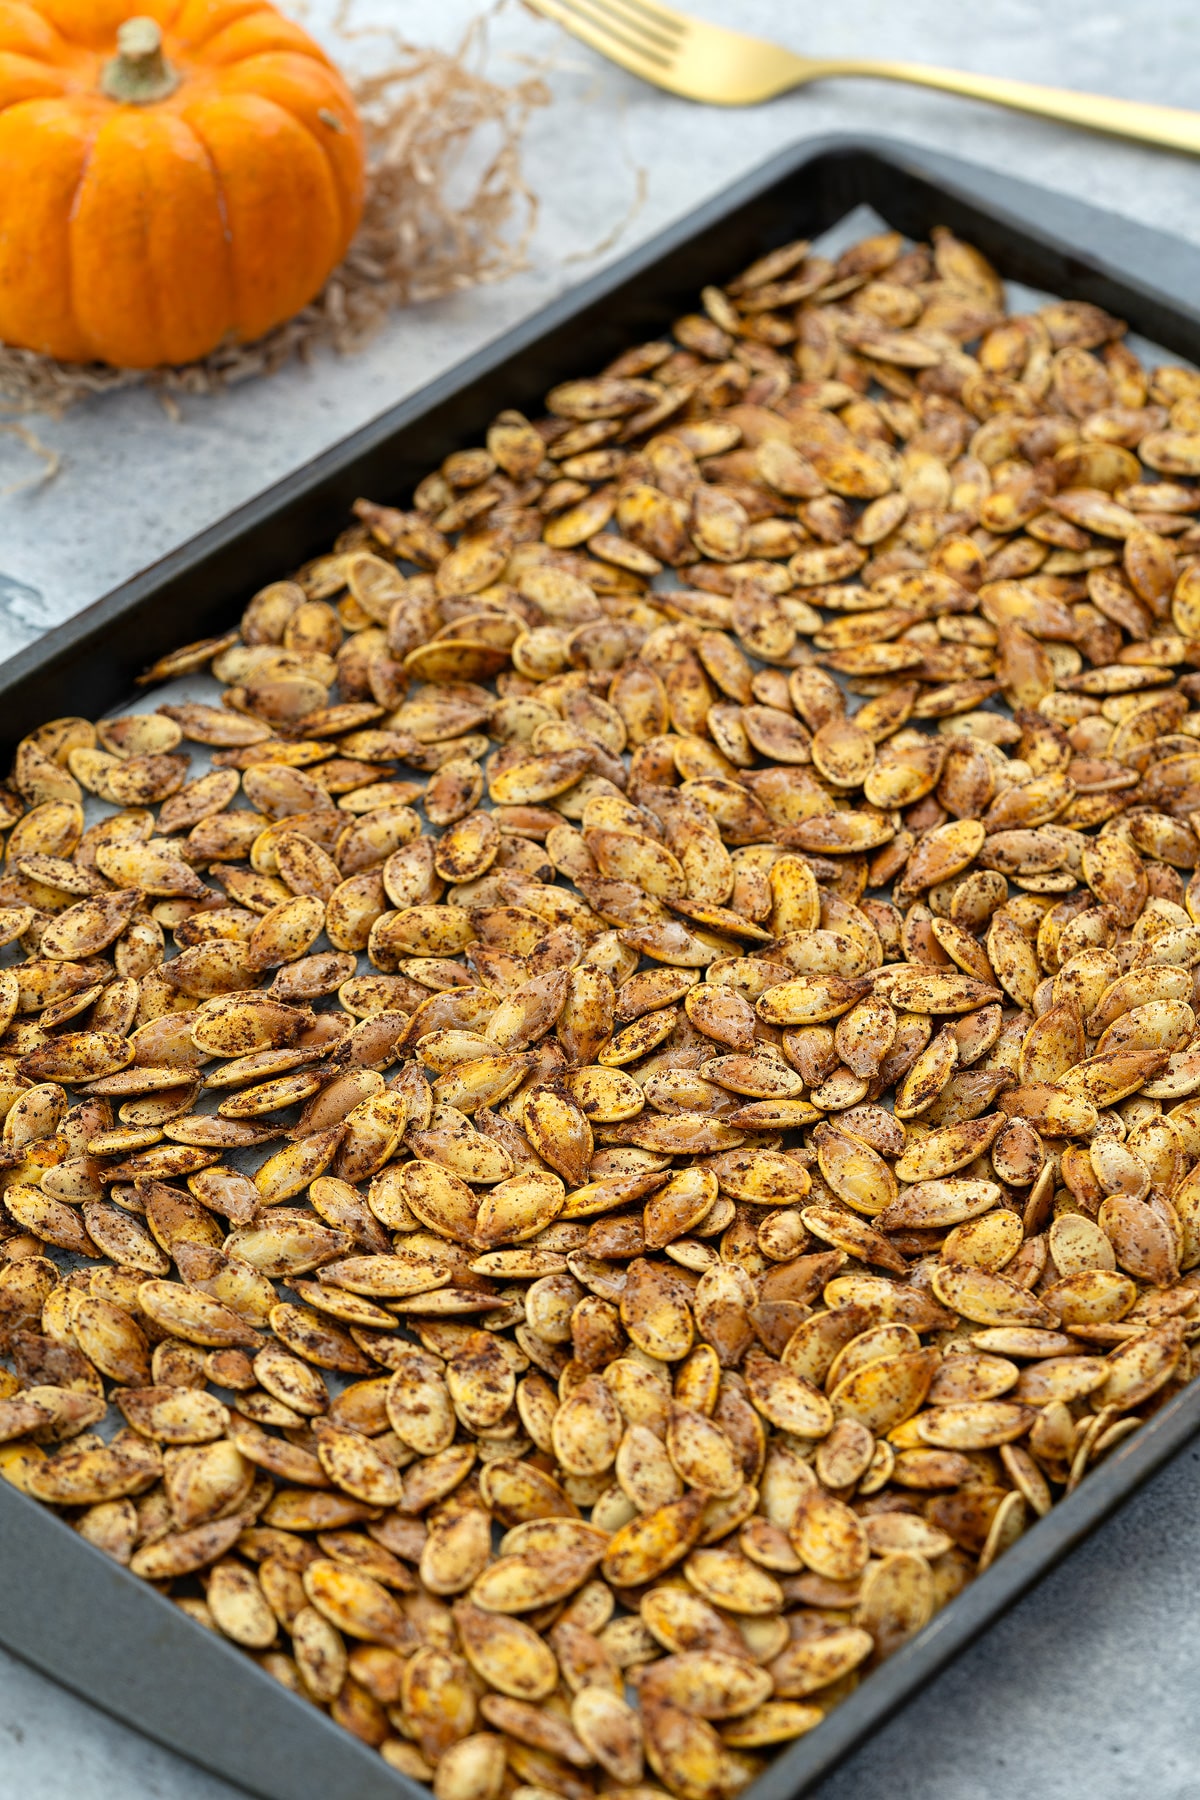 Roasted pumpkin seeds on a baking tray, placed on a white table with a golden fork and a small pumpkin arranged beside it.